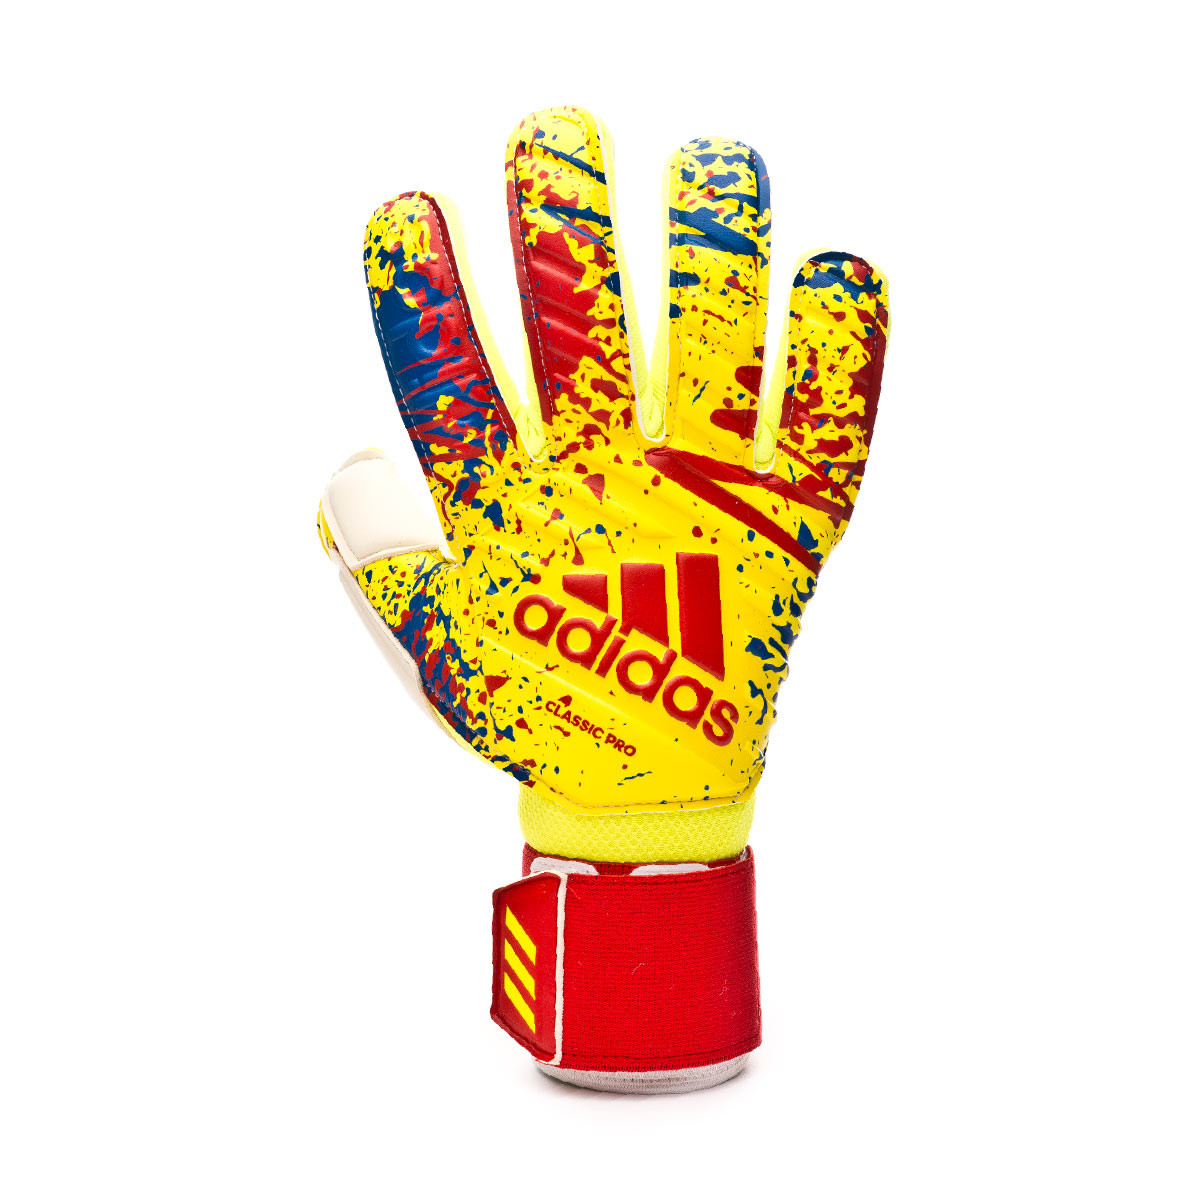 classic pro gloves